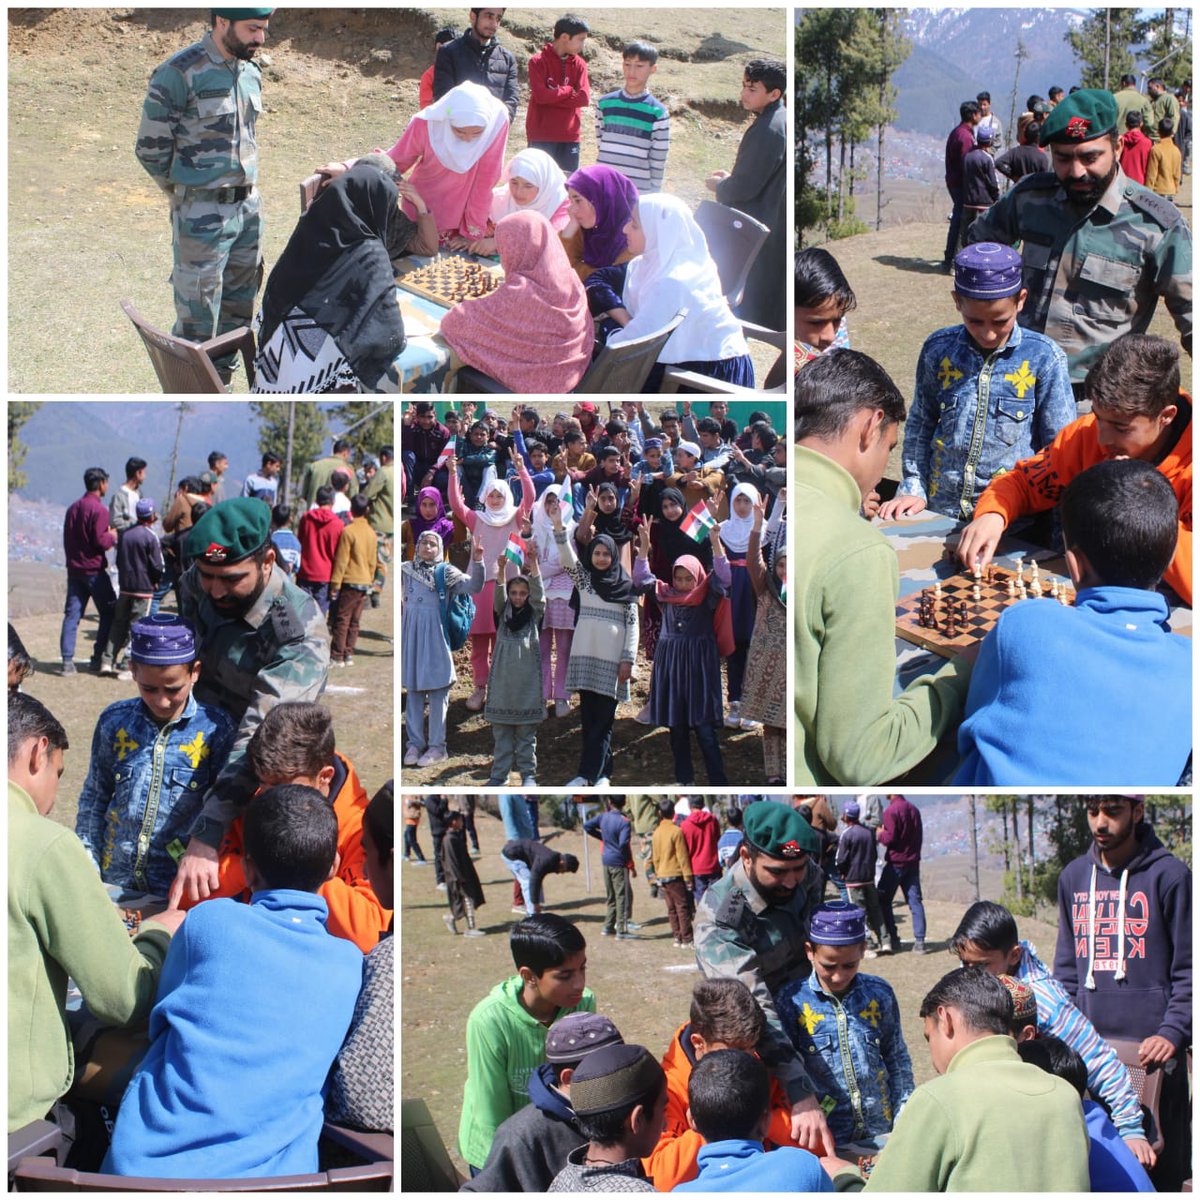 Indian Army Organised A Day with Coy Cdr at Tekipora, Lolab

#IndianArmy
#IgnitingMinds
#TransformingIndia
#IndianArmyNationBuilding
#GreenArmy
#SustainableFuture